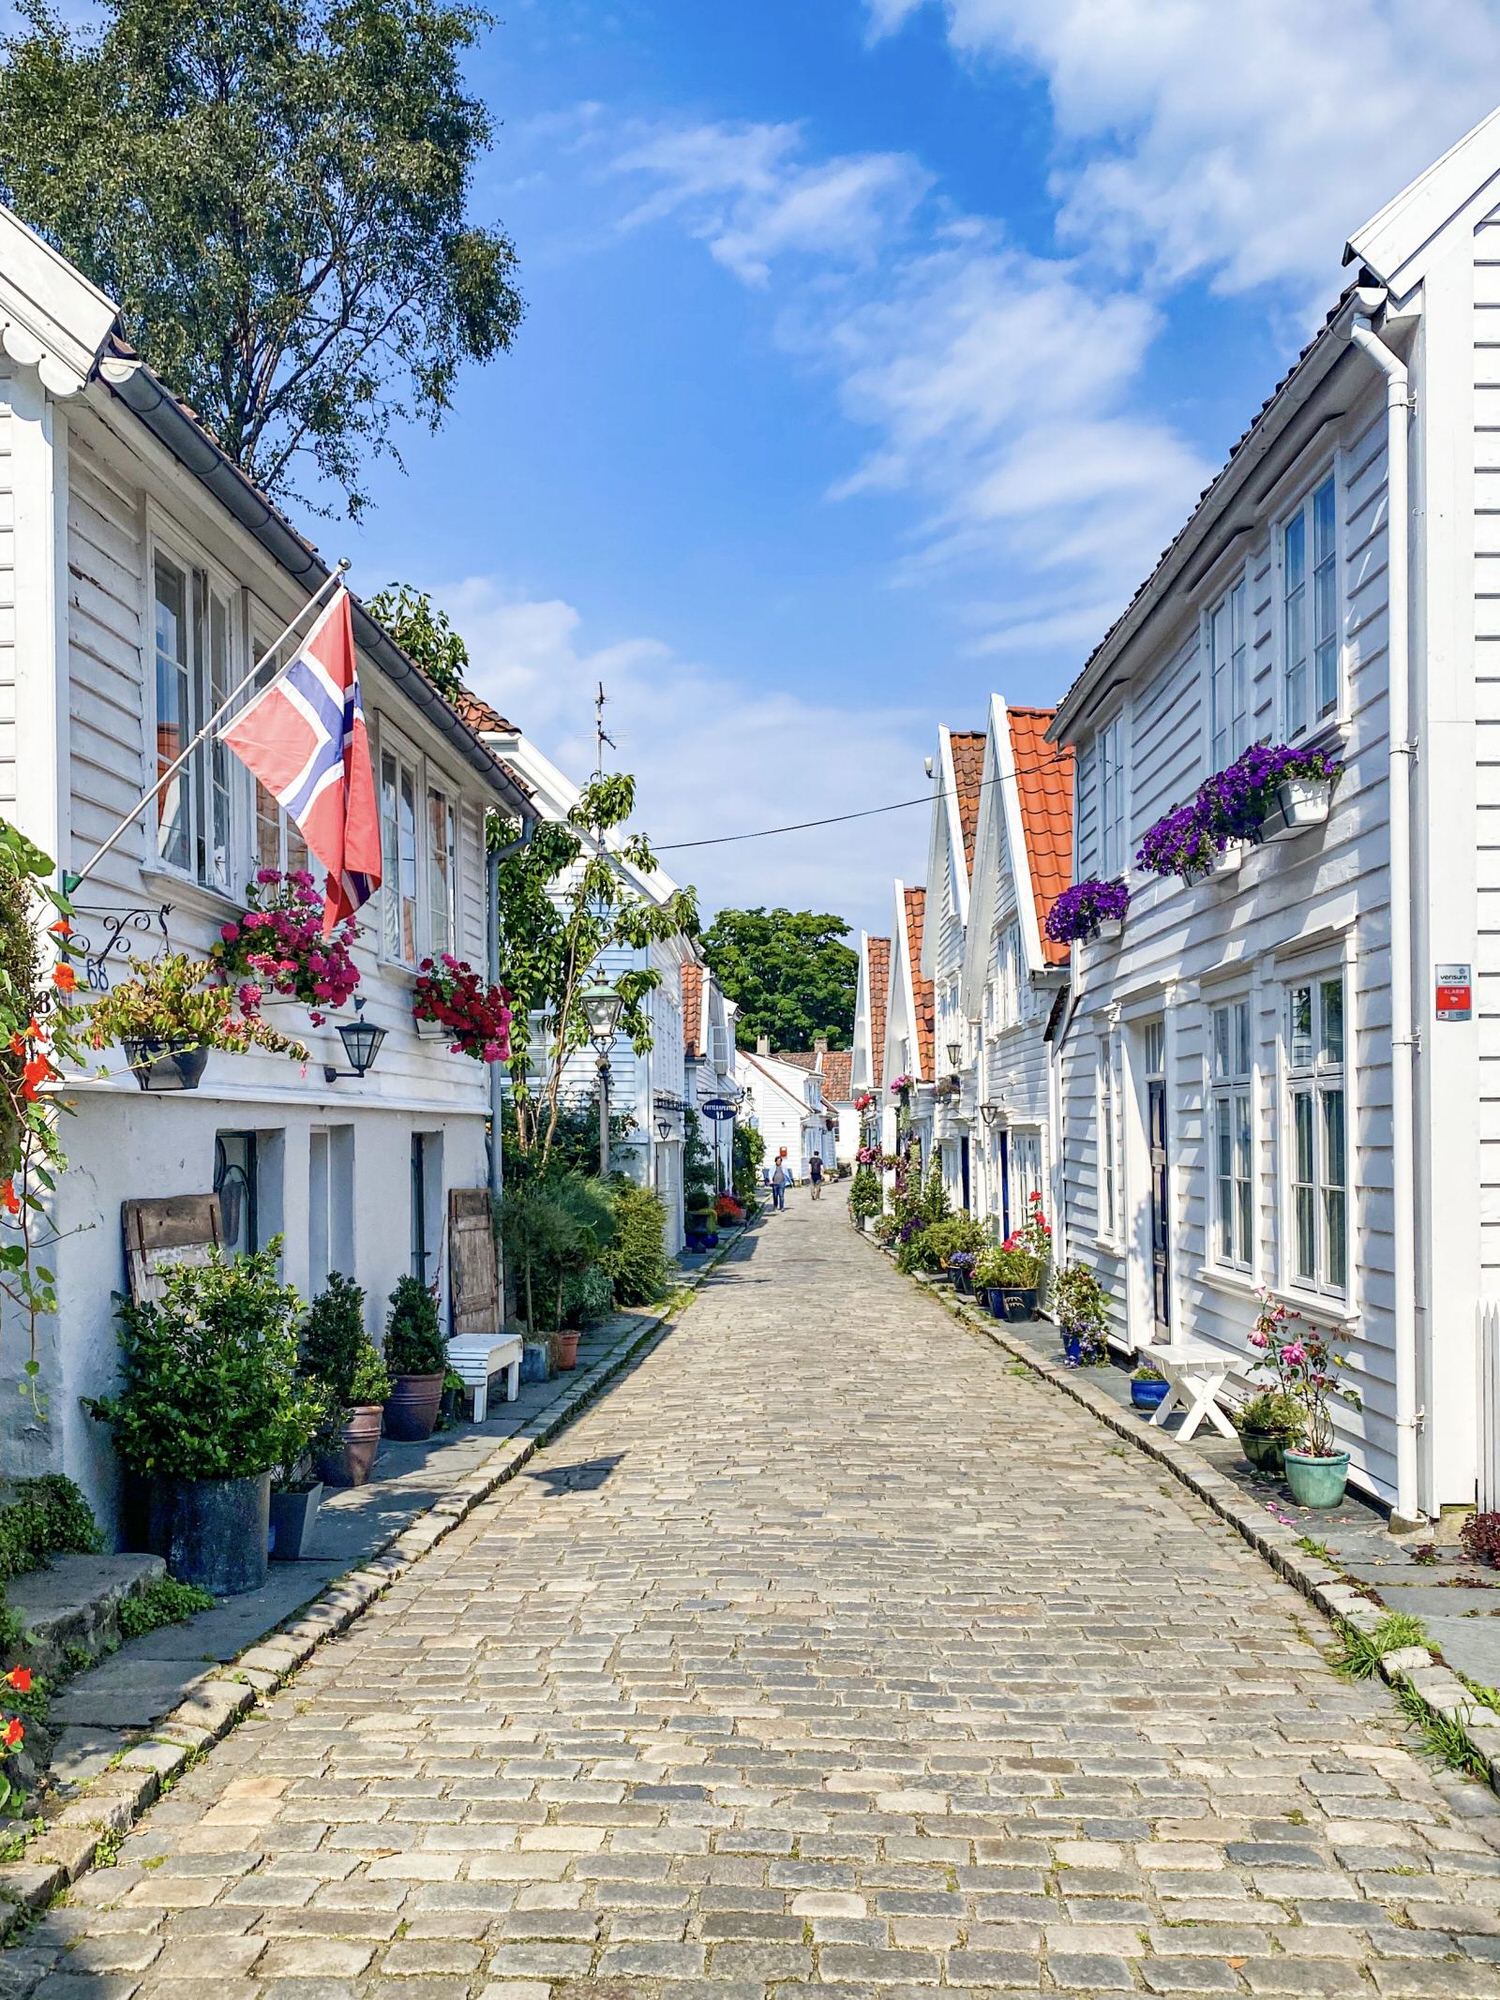 How to Spend A Long Weekend in Stavanger